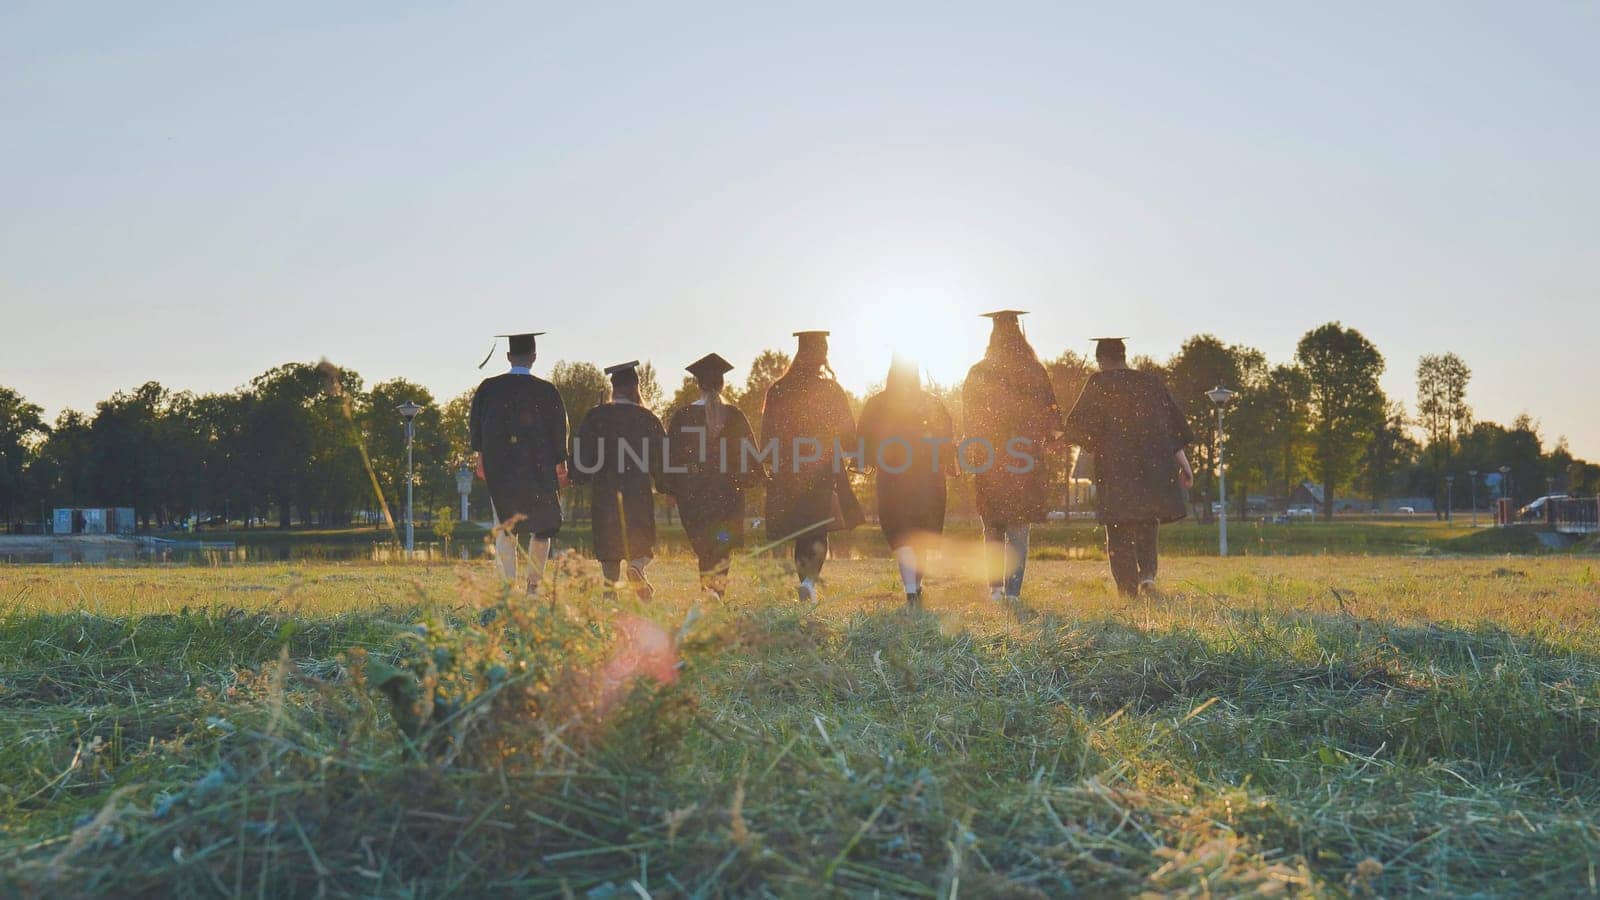 Graduate students walking through an evening meadow at sunset. by DovidPro